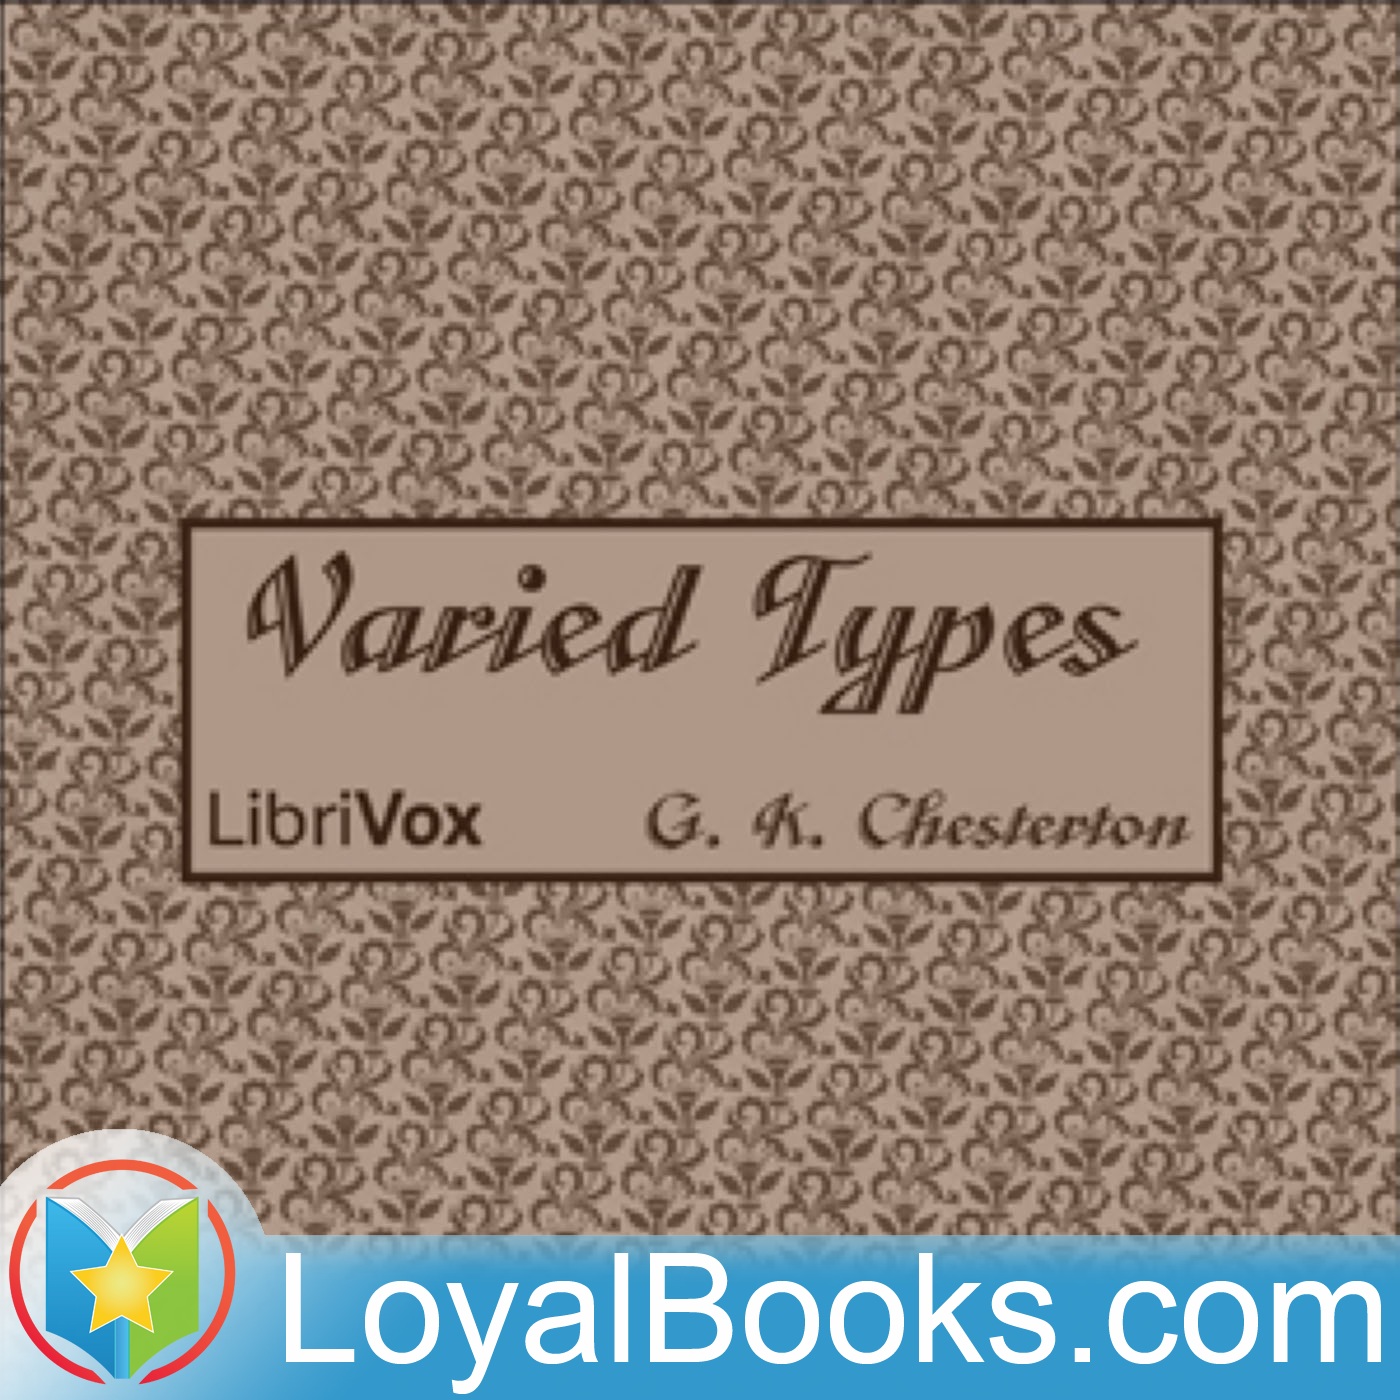 Varied Types by G. K. Chesterton